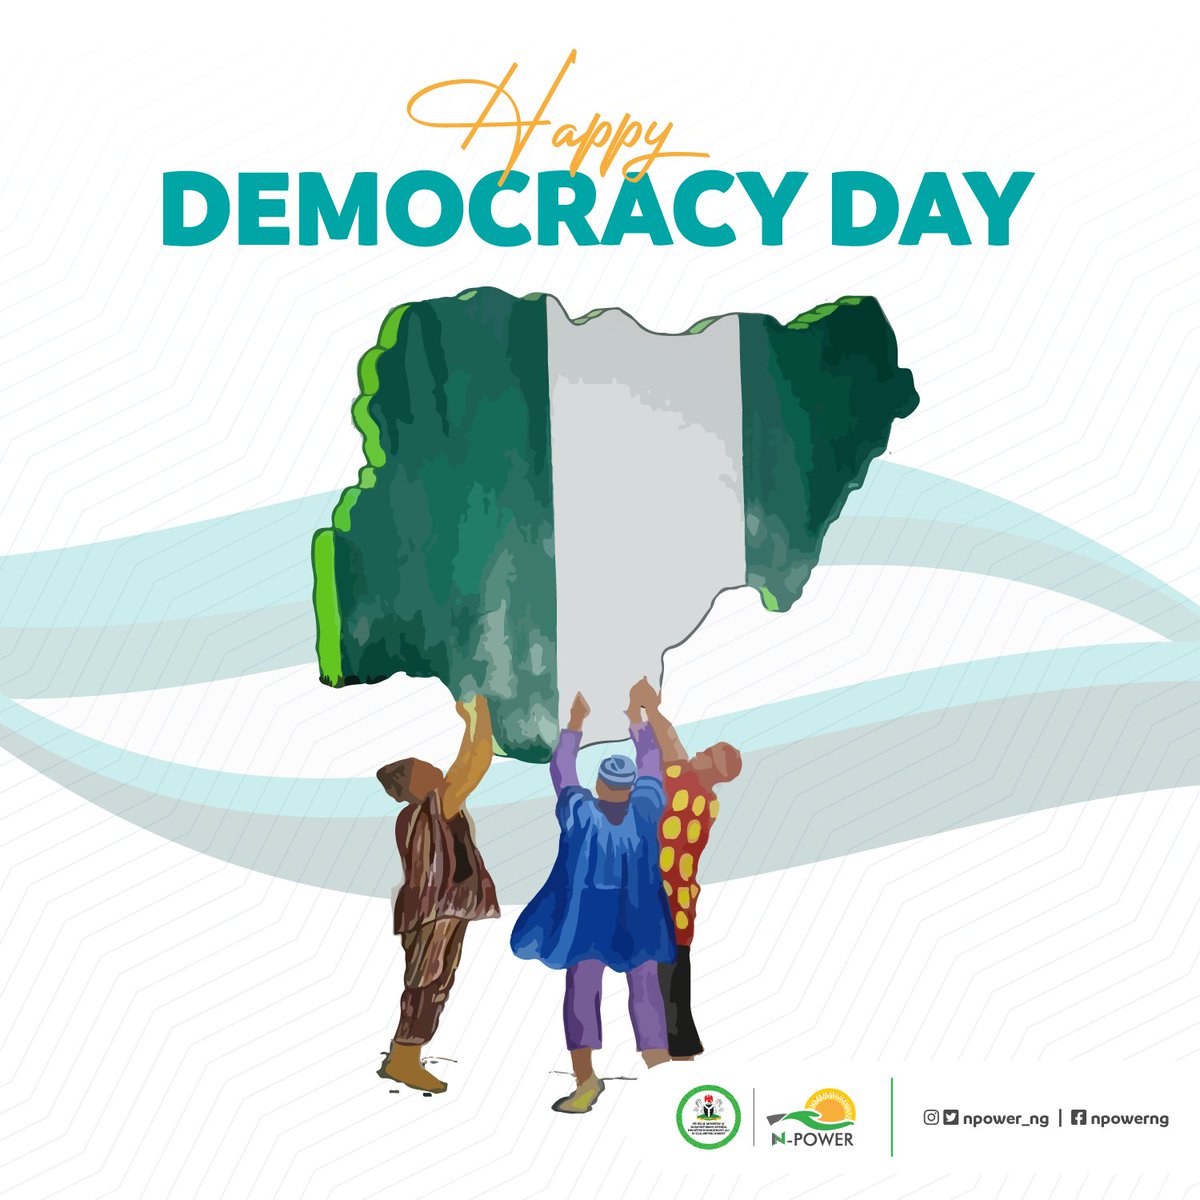 Happy Democracy Day! You are a part, I am a part. Together, we are whole. Do your part! #npowerng #democracy #npower #npowered